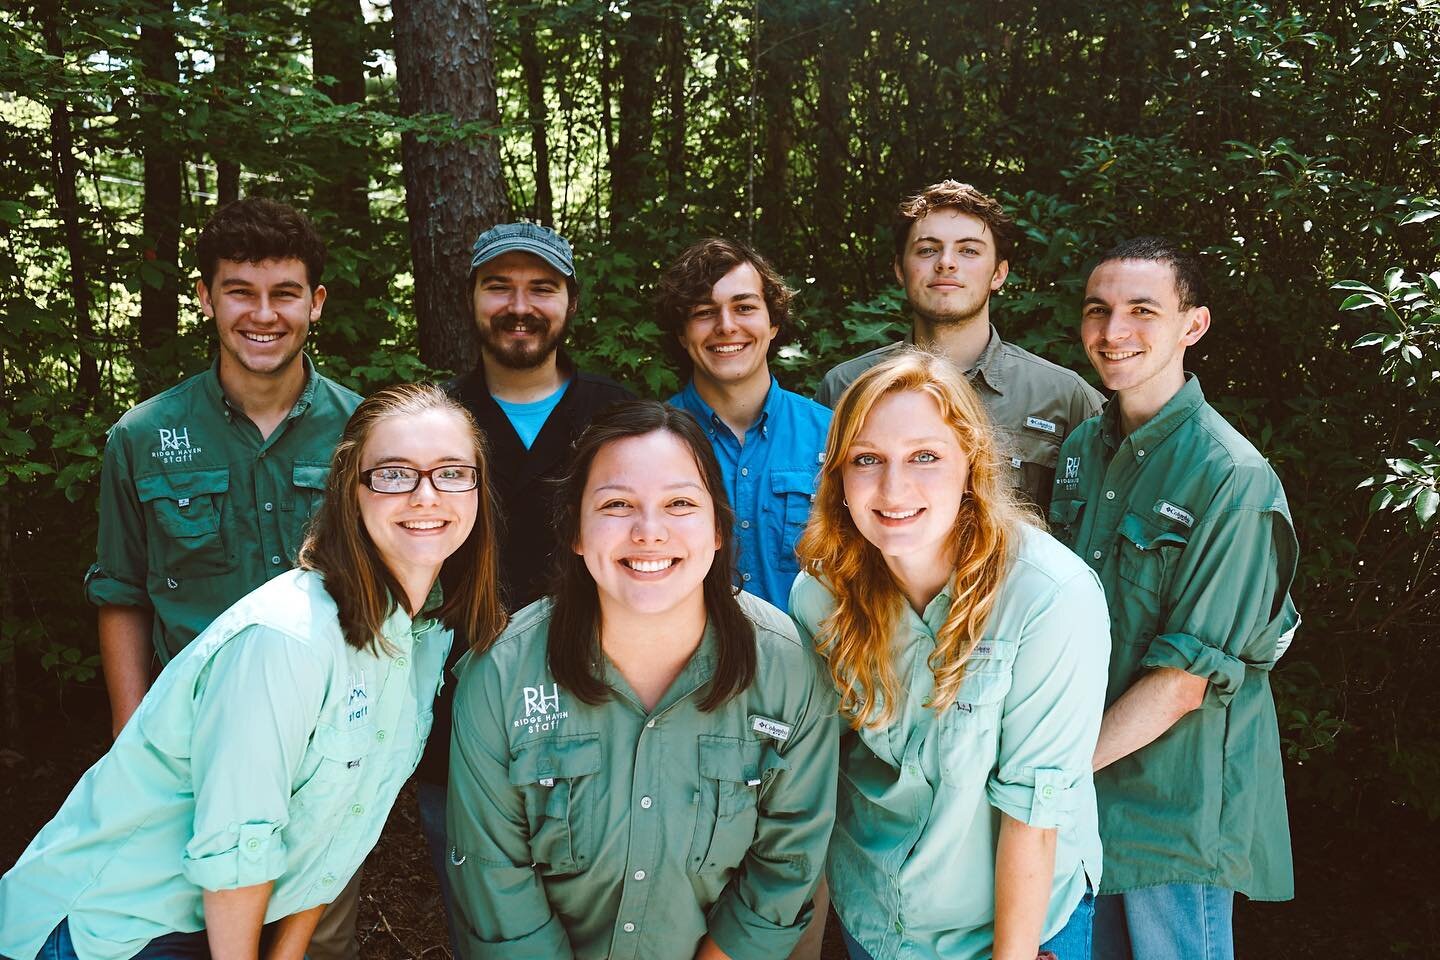 Meet this year&rsquo;s Fall Retreat Staff! Each of our Retreat Staff members live and work at Ridge Haven year round and will be serving all guests here on campus. A closer look at staff intros is just around the corner, so stay tuned! 🏕️

(Not pict